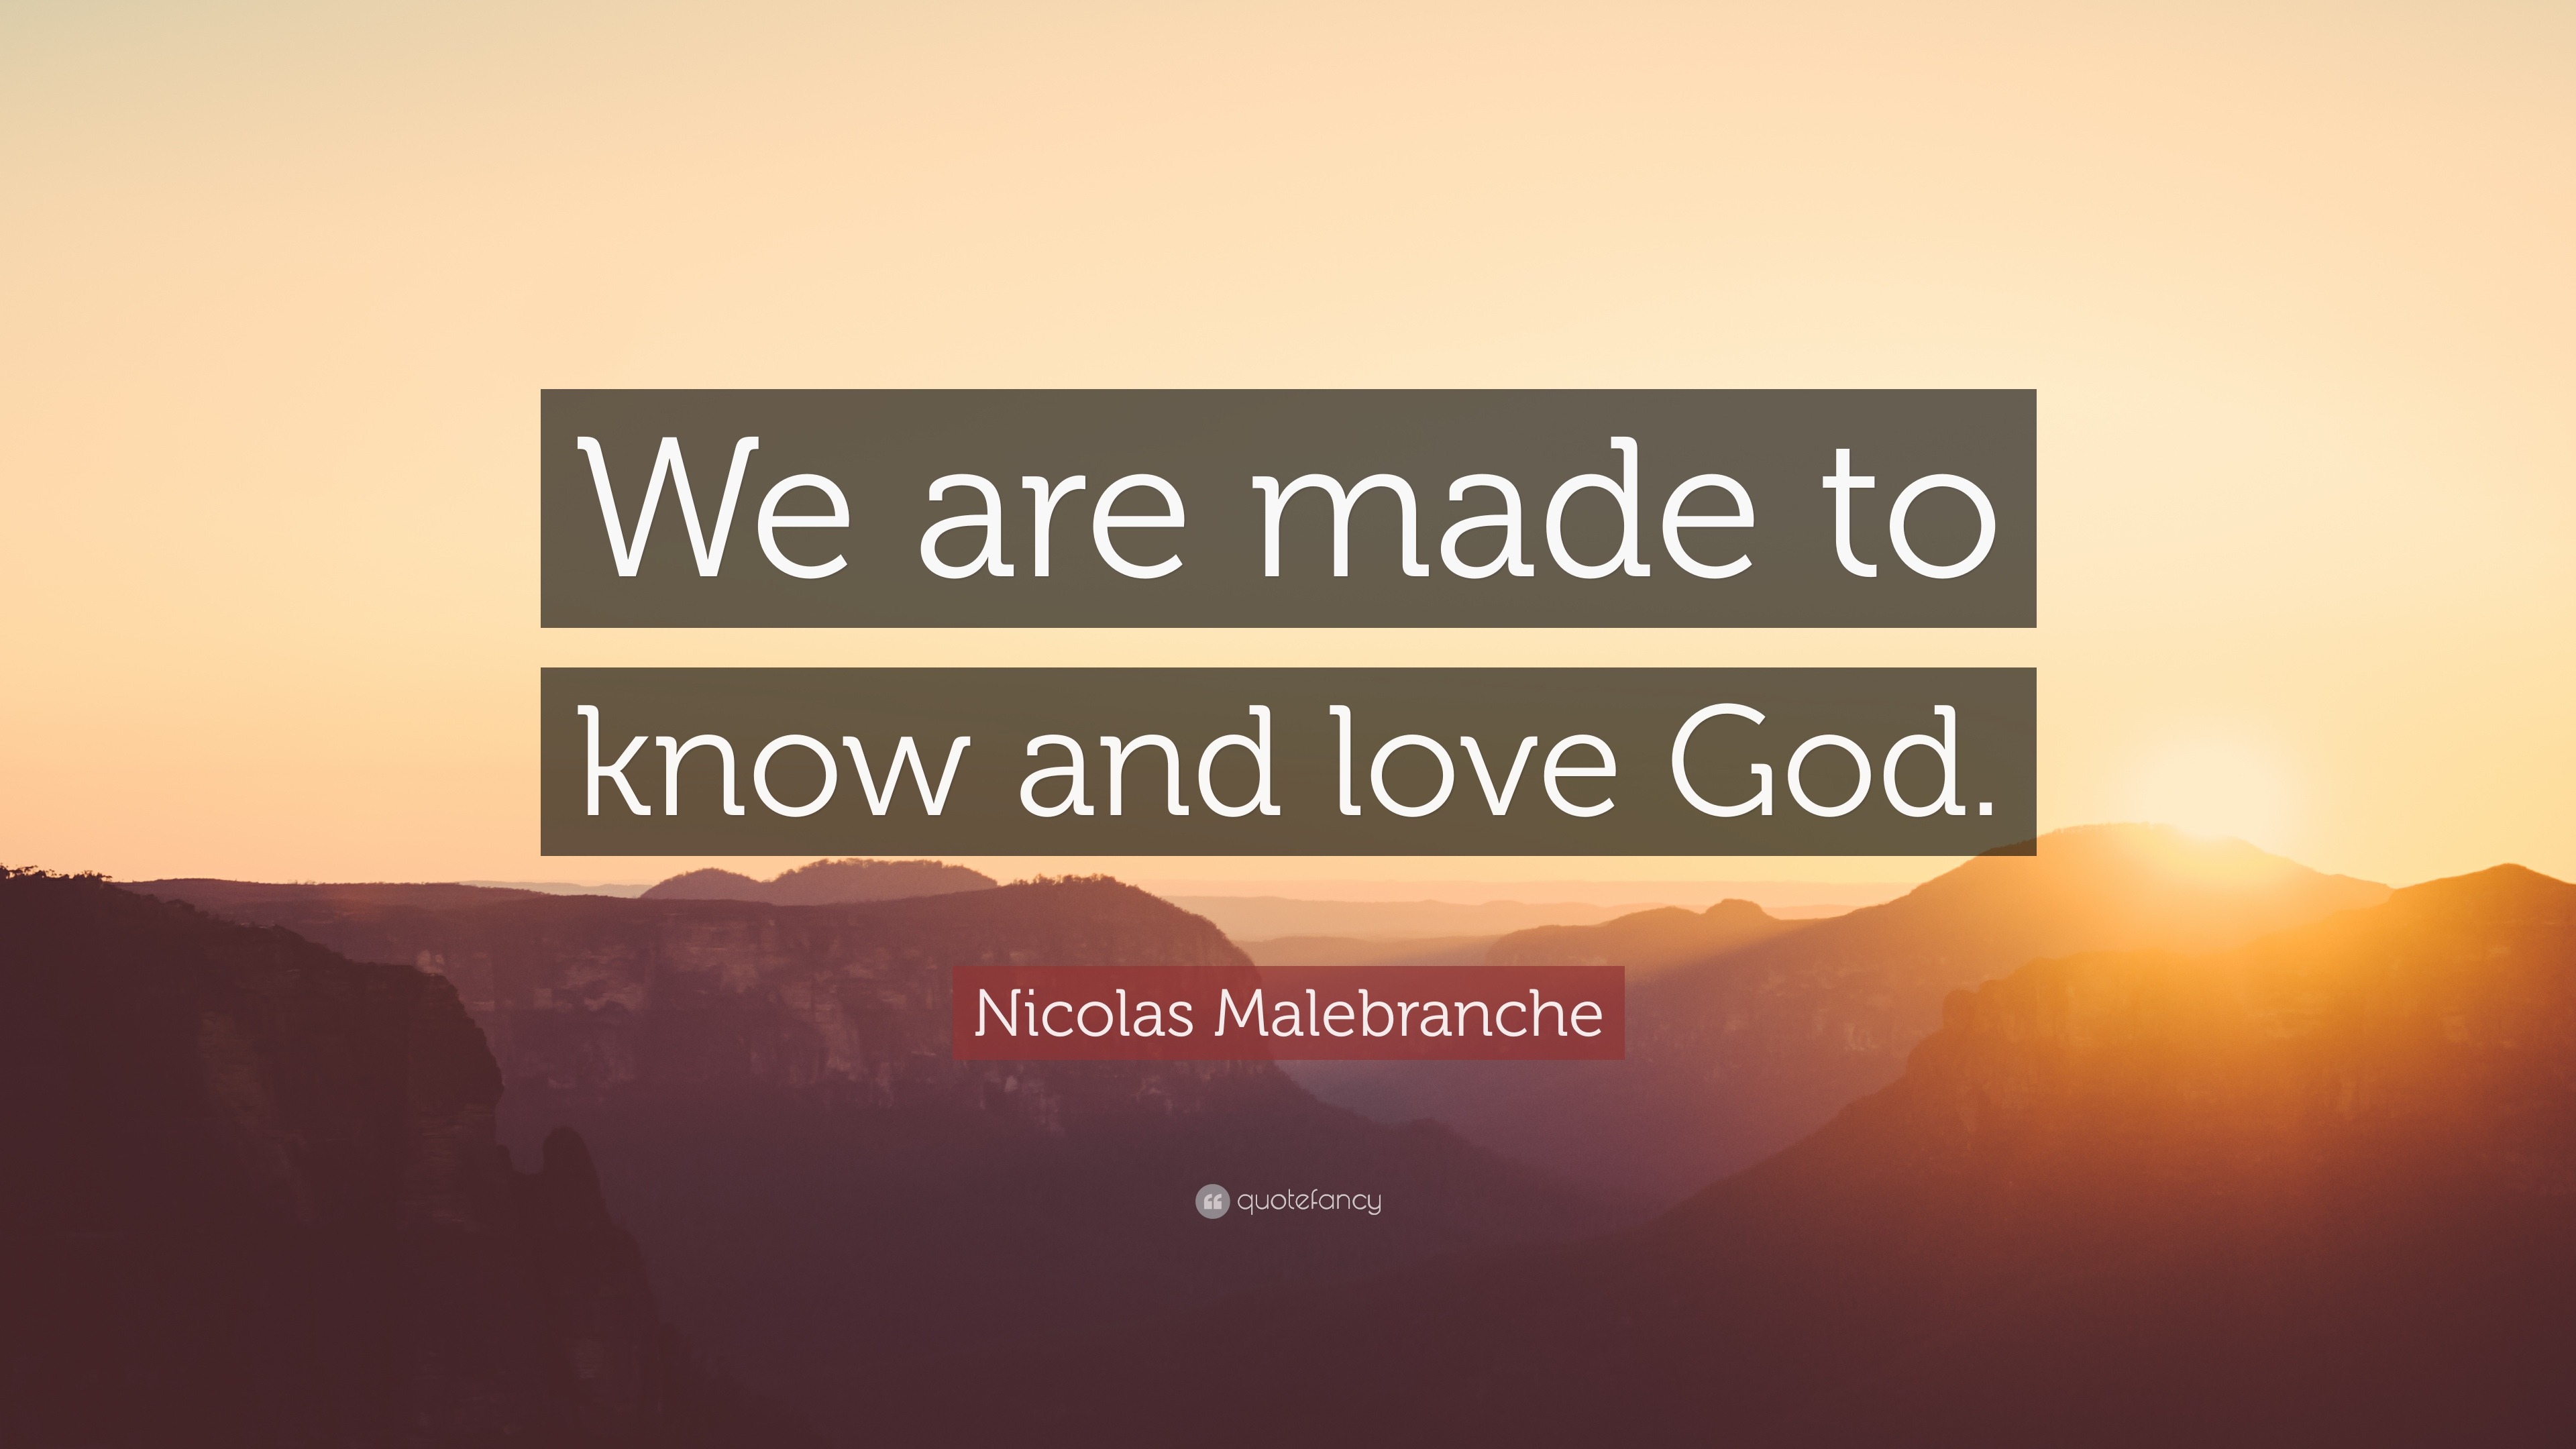 Nicolas Malebranche Quote: “We are made to know and love God.” (9  wallpapers) - Quotefancy